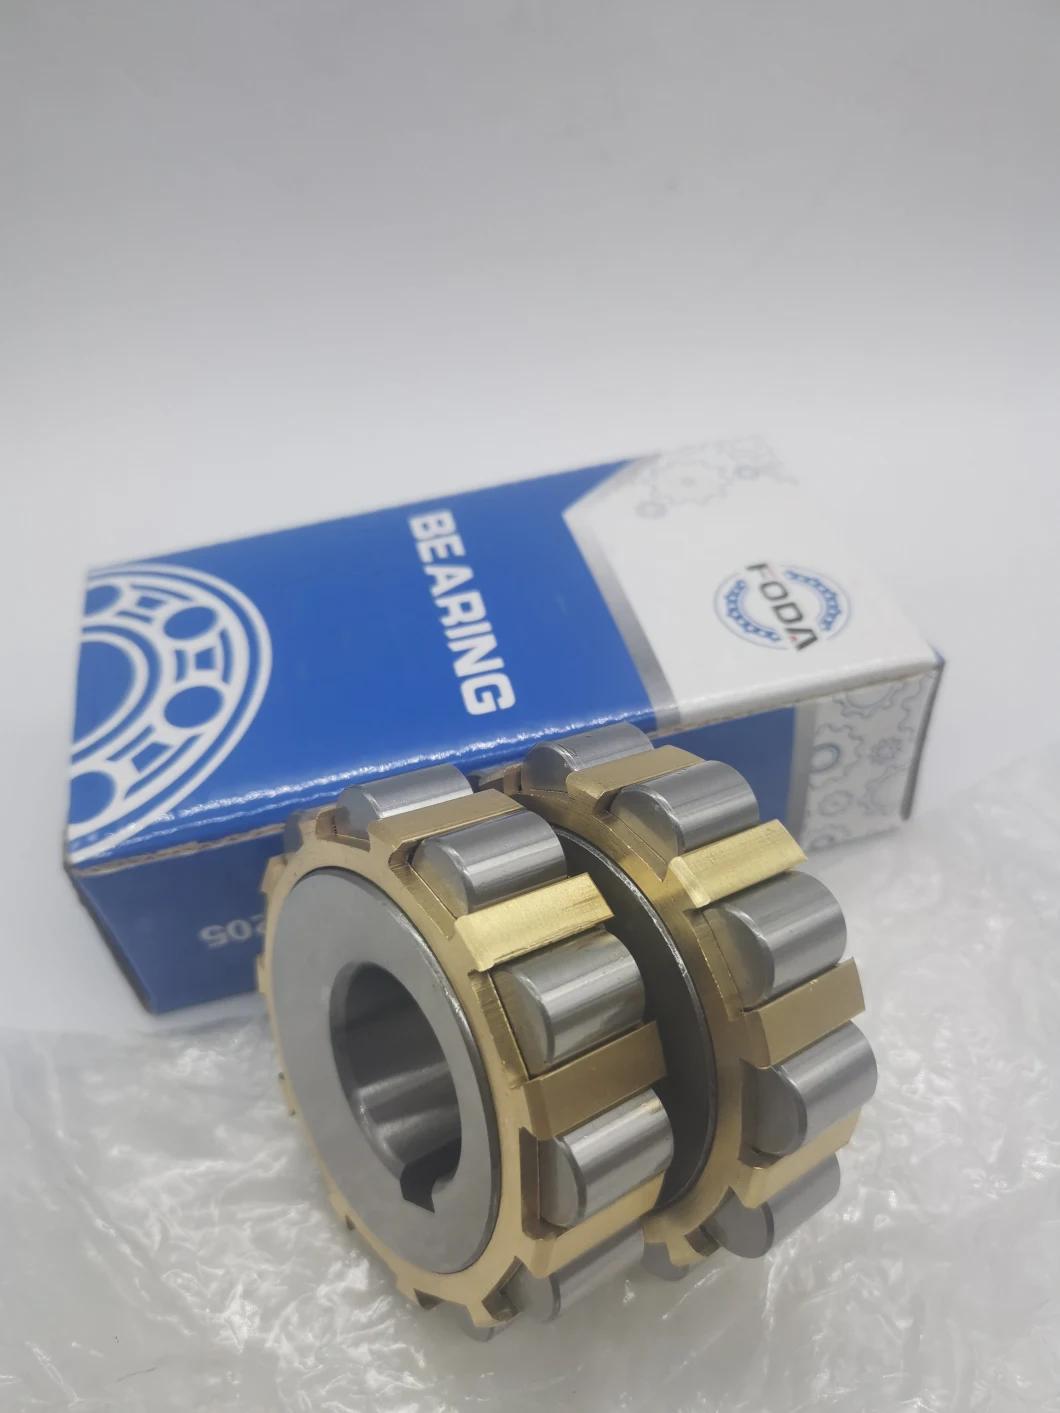 Auto Bearing /Motorcycle Parts/Motorcycle Spare Parts/Bearing (22UZ8311 RN1010 RN1012 RN1014 RN1016 RV1018 RN1020 RN1024 RN202 RN203 RN204 RN205 RN206 RN208)